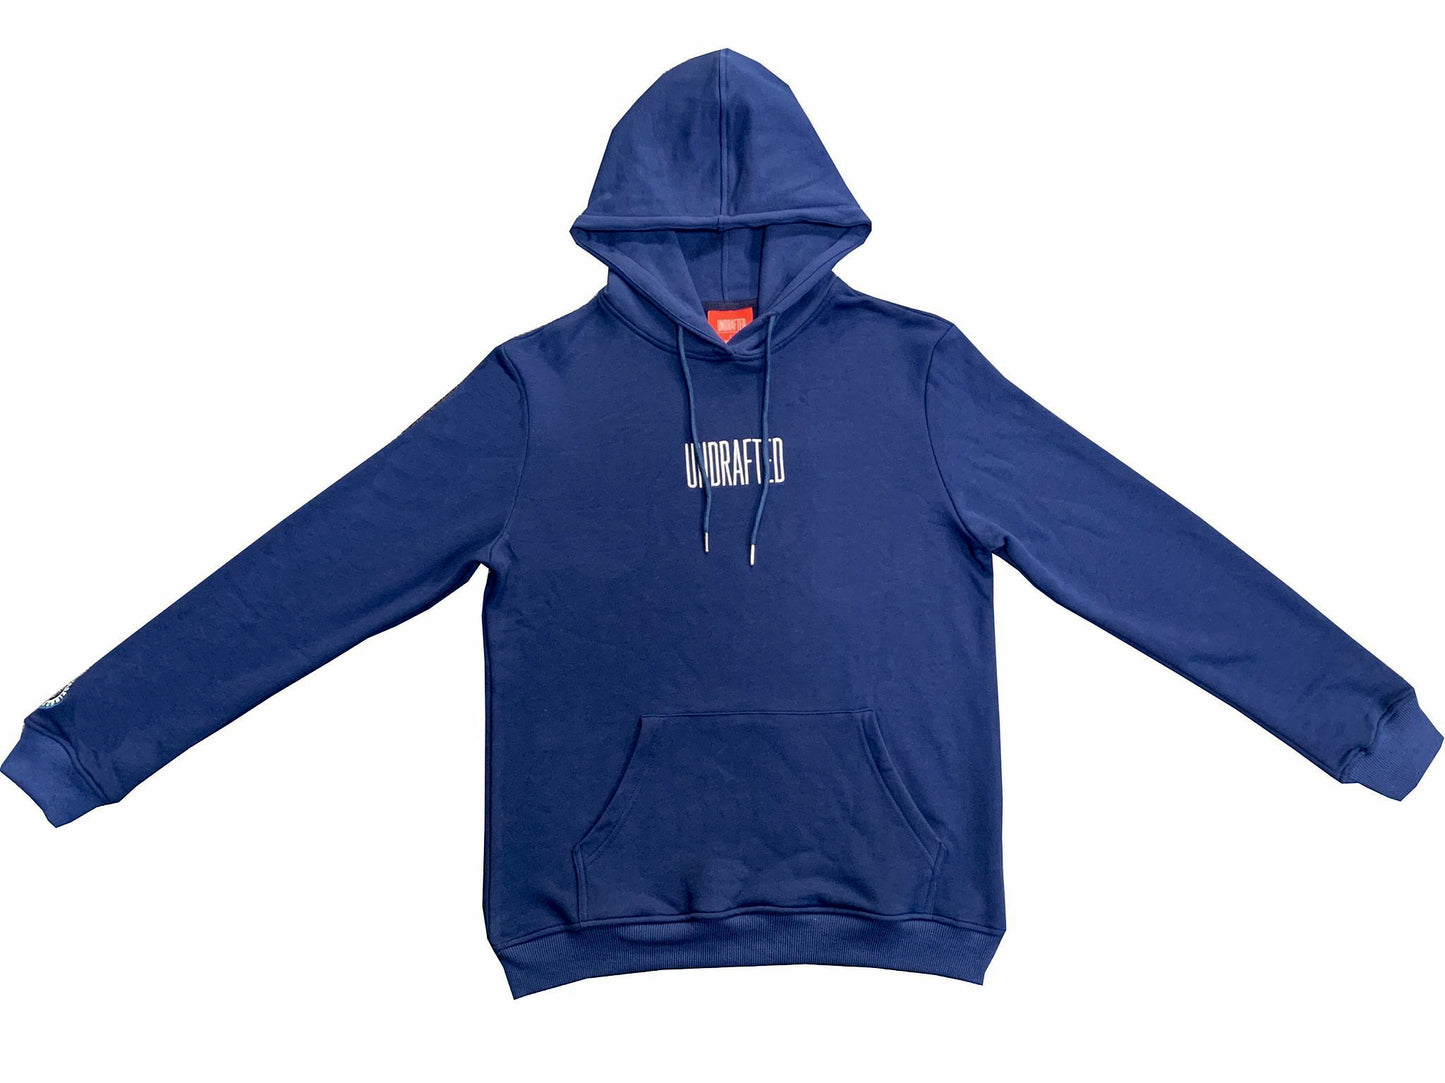 Undrafted Hoodie- Navy Blue/White*